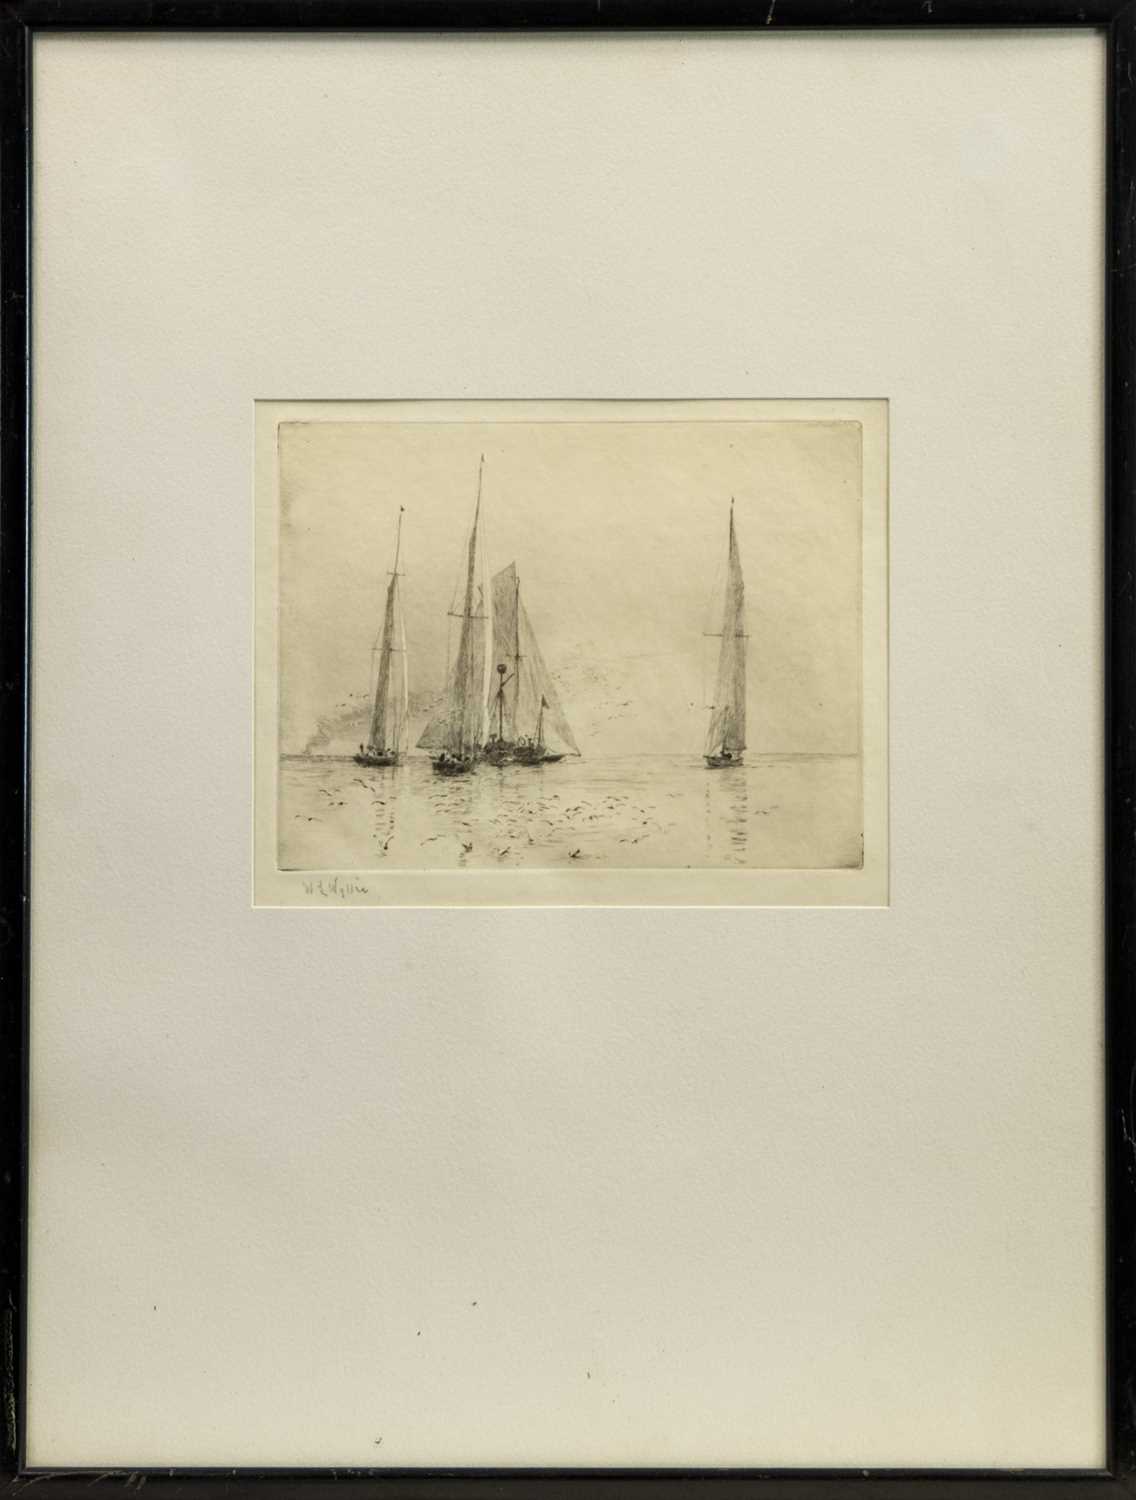 Lot 157 - YACHTS, AN ETCHING BY WILLIAM WYLLIE